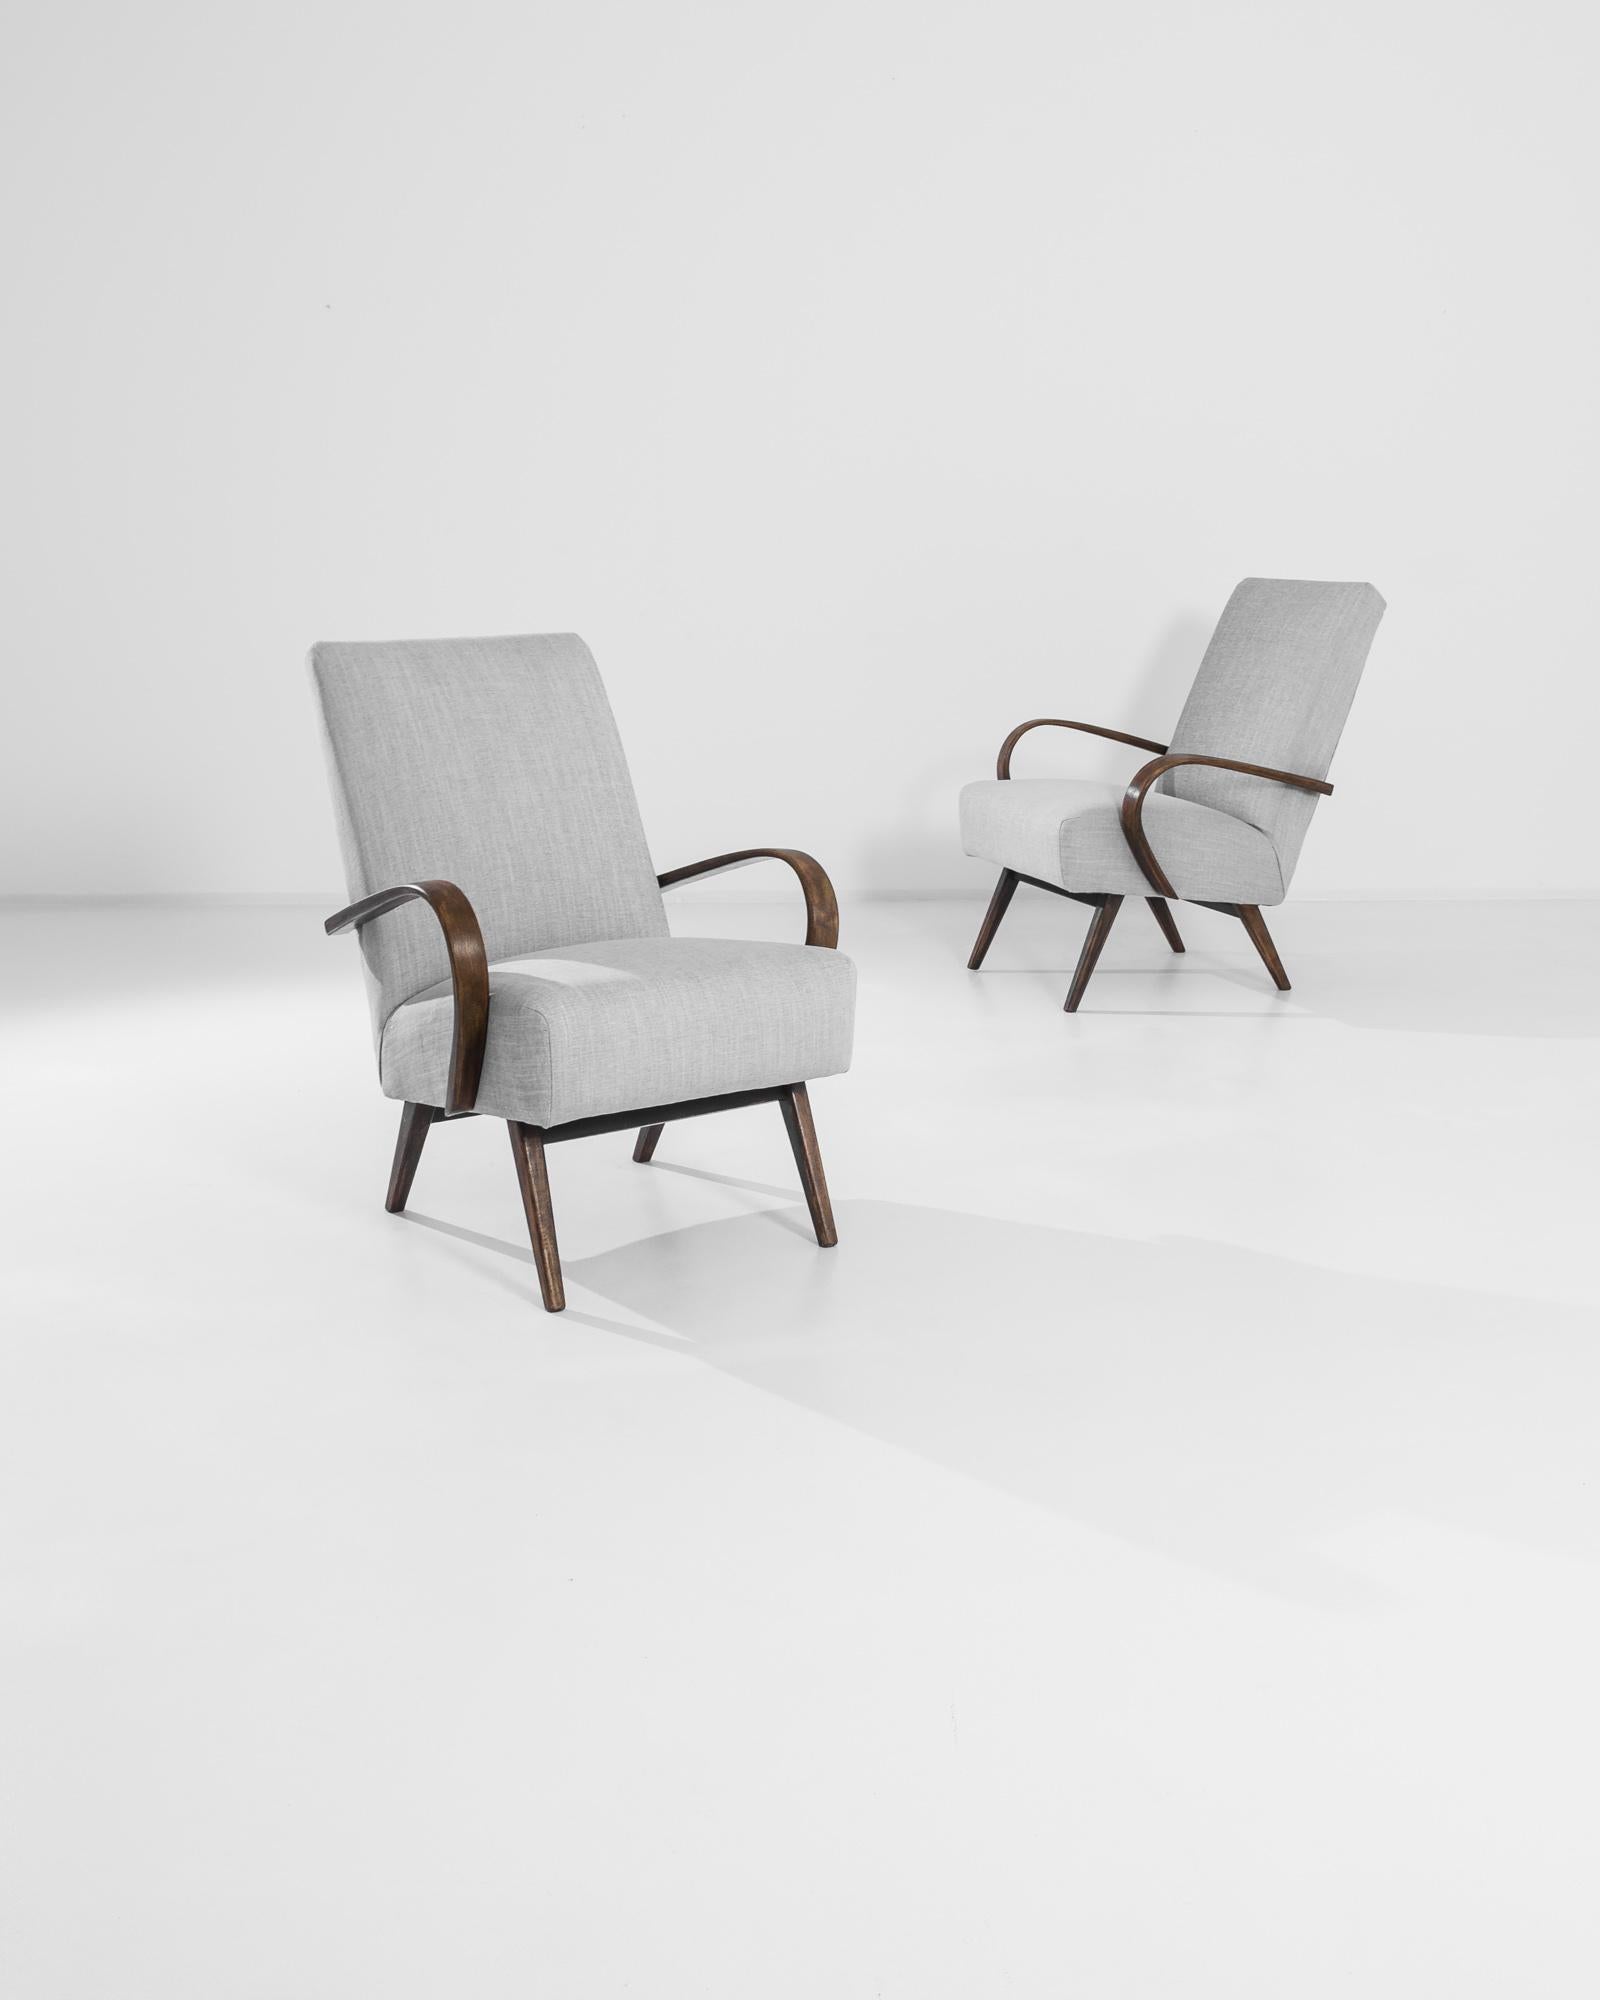 A pair of armchairs by Czech furniture designer Jindrich Halabala. This 1950s design is upholstered in an updated gray fabric, the soothing heather tone was chosen to compliment the dark stain of the hardwood frame. Influenced by Modern and Art Deco